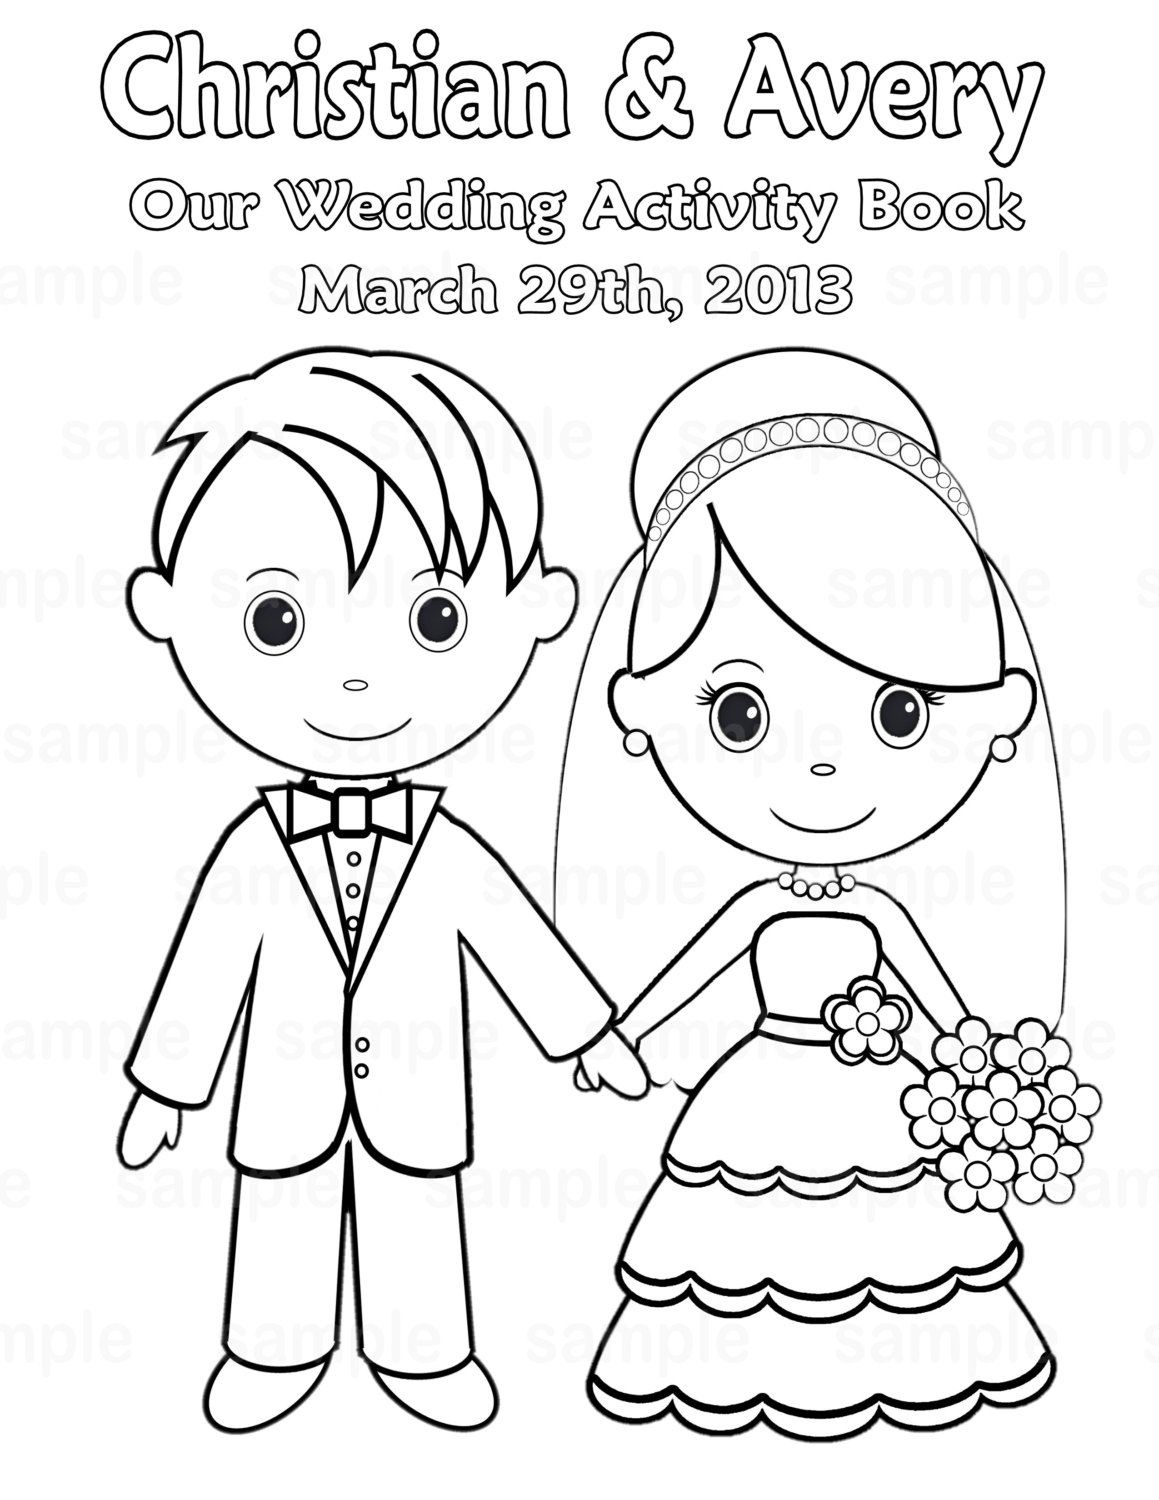 Printable Personalized Wedding Coloring Activity Book Favor Kids 8.5 - Free Printable Personalized Wedding Coloring Book